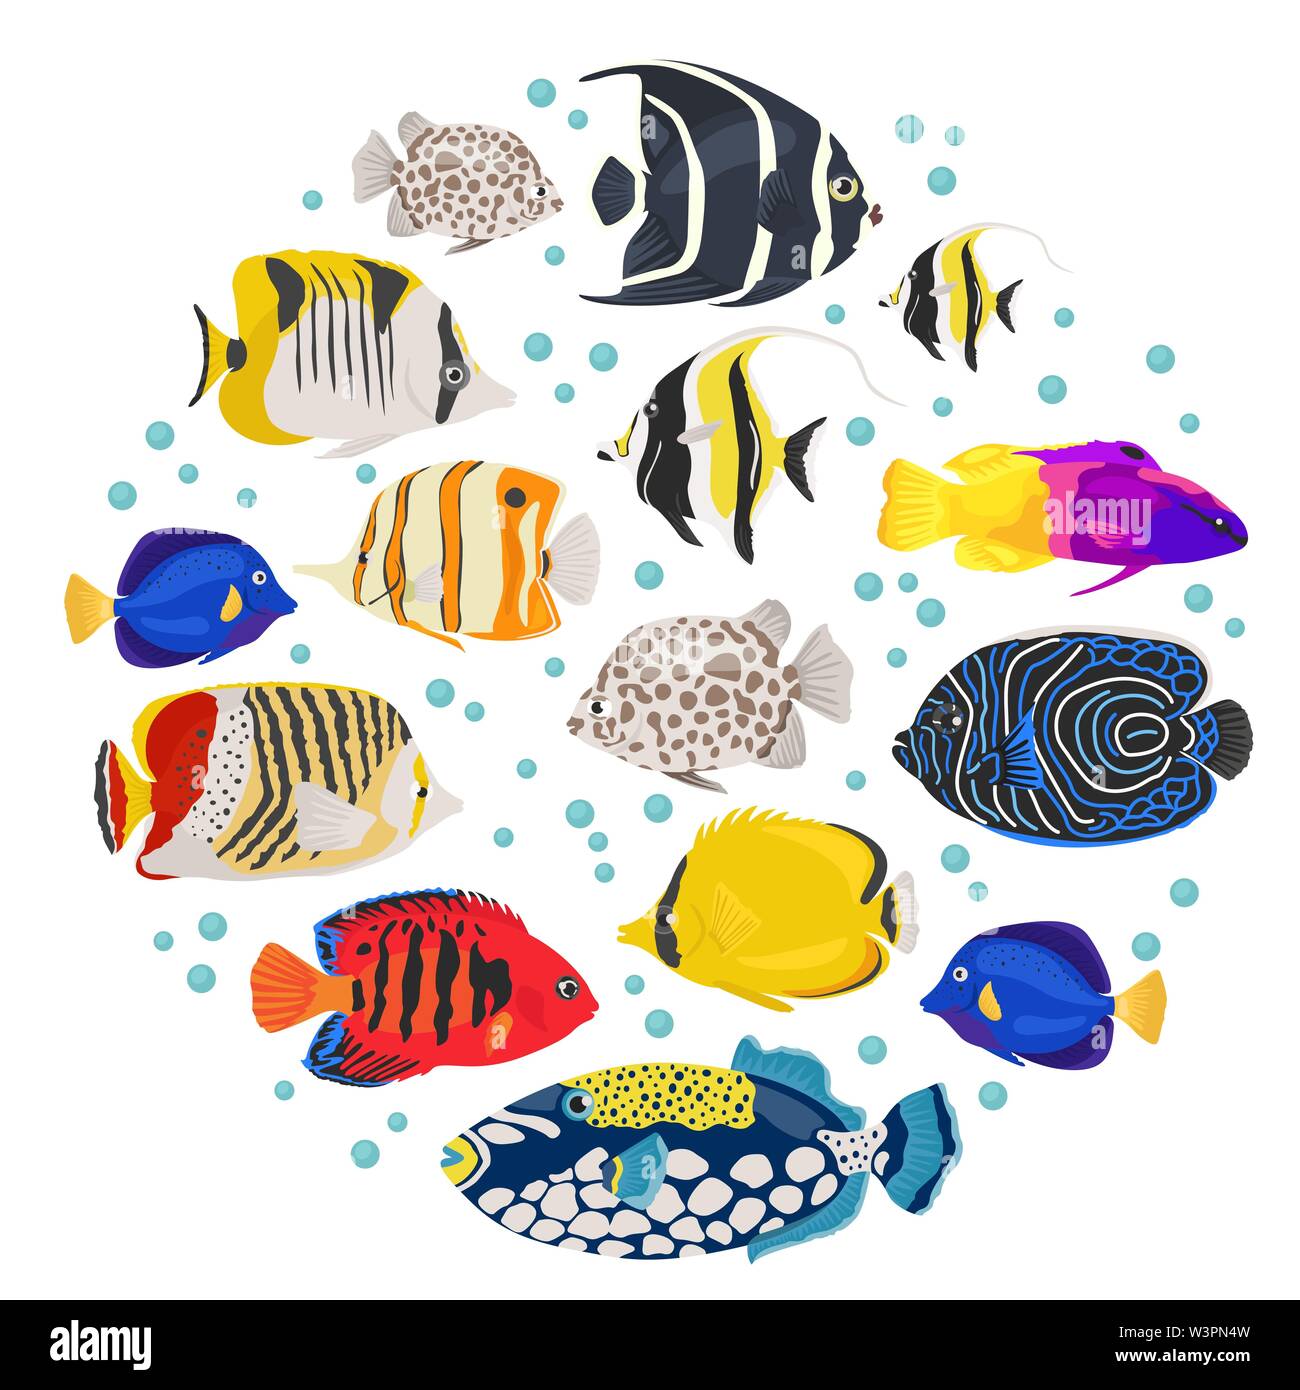 Freshwater aquarium fish breeds icon set flat style isolated on white. Coral reef. Create own infographic about pet. Vector illustration Stock Vector